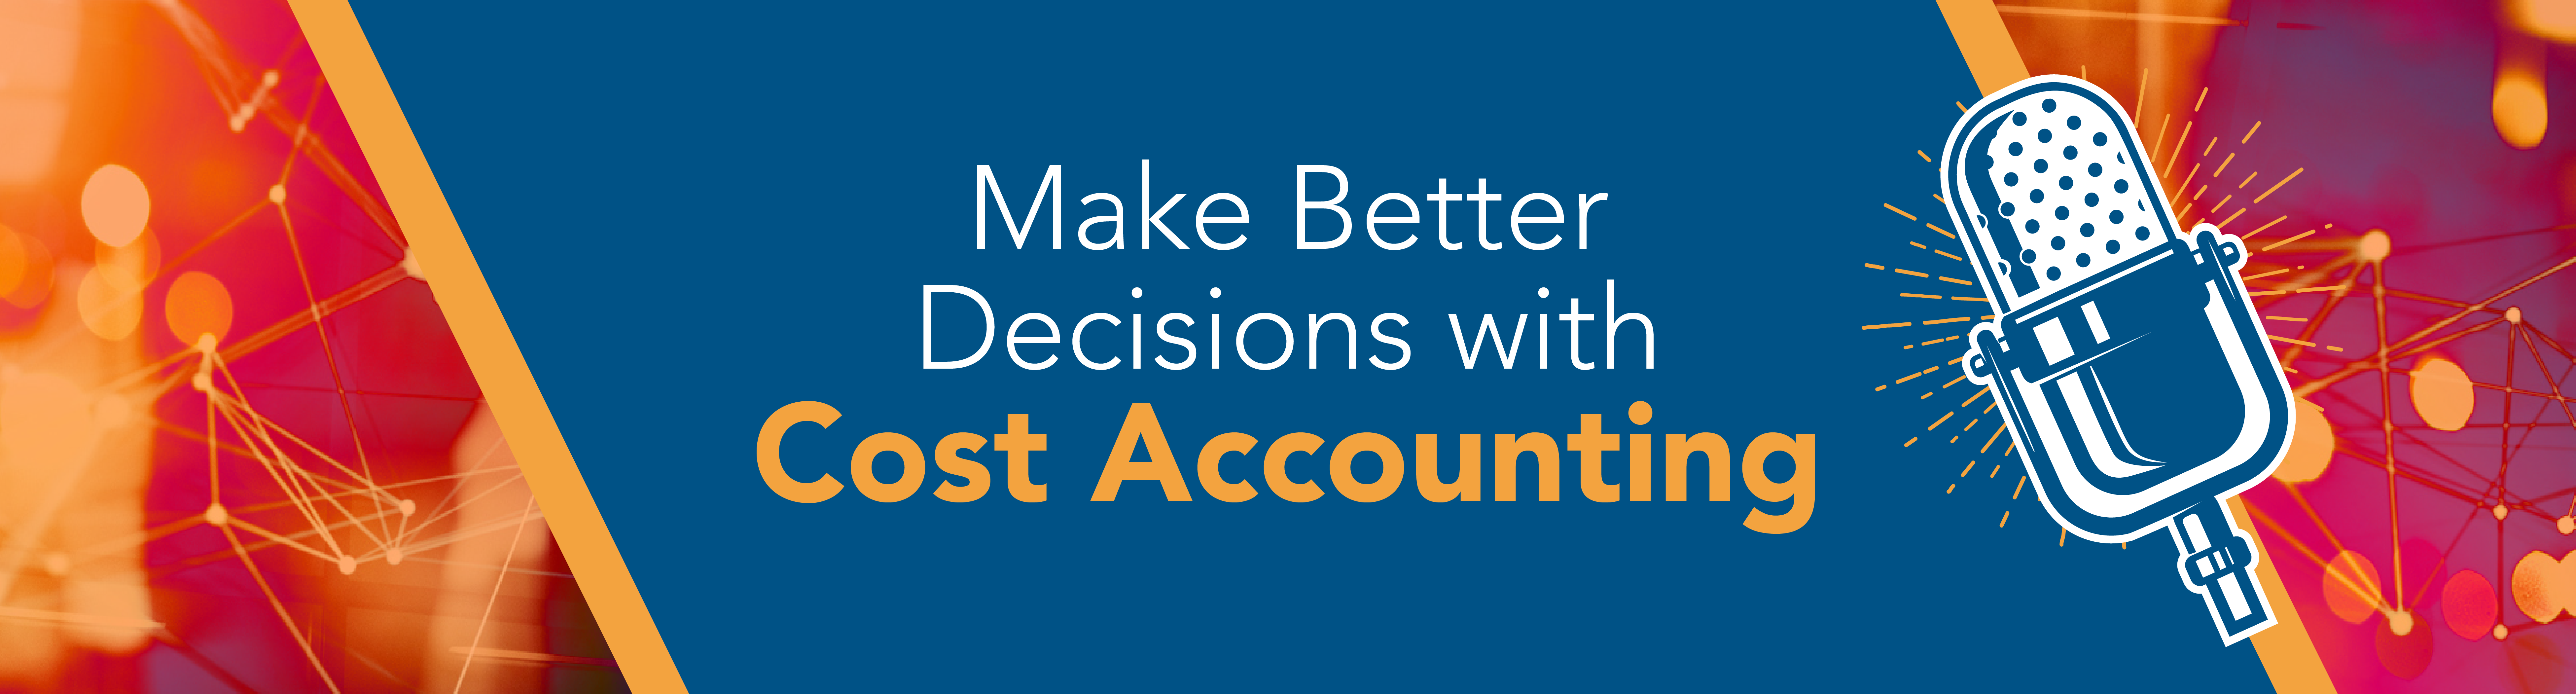 Make Better Decisions with Cost Accounting-01